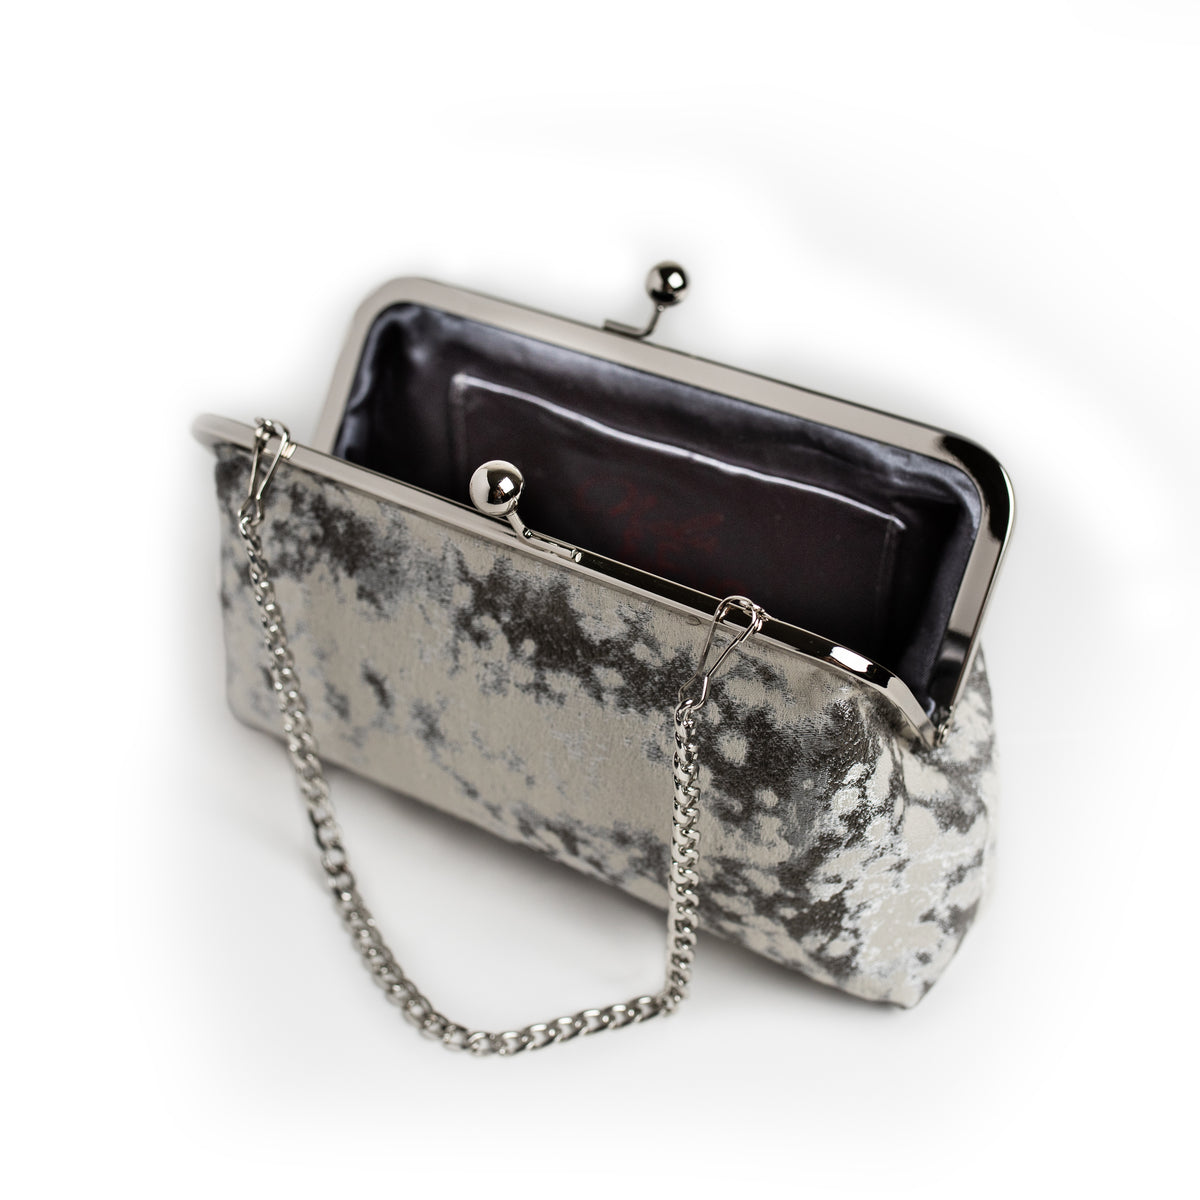 Brocade Prom Purse – Shop with a Mission